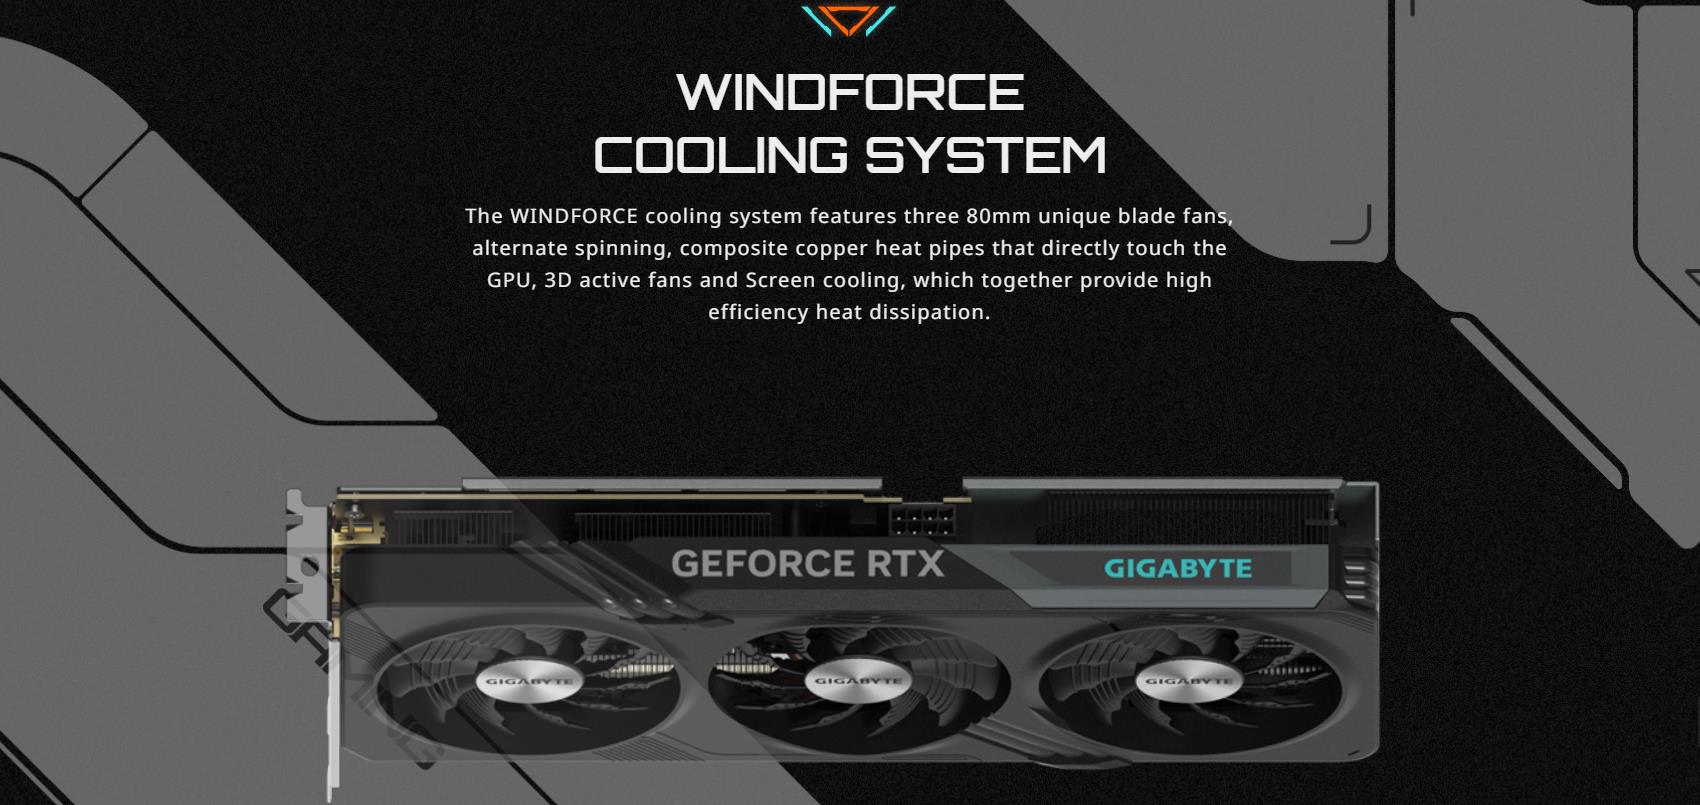 A large marketing image providing additional information about the product Gigabyte GeForce RTX 4060 Gaming OC 8GB GDDR6 - Additional alt info not provided